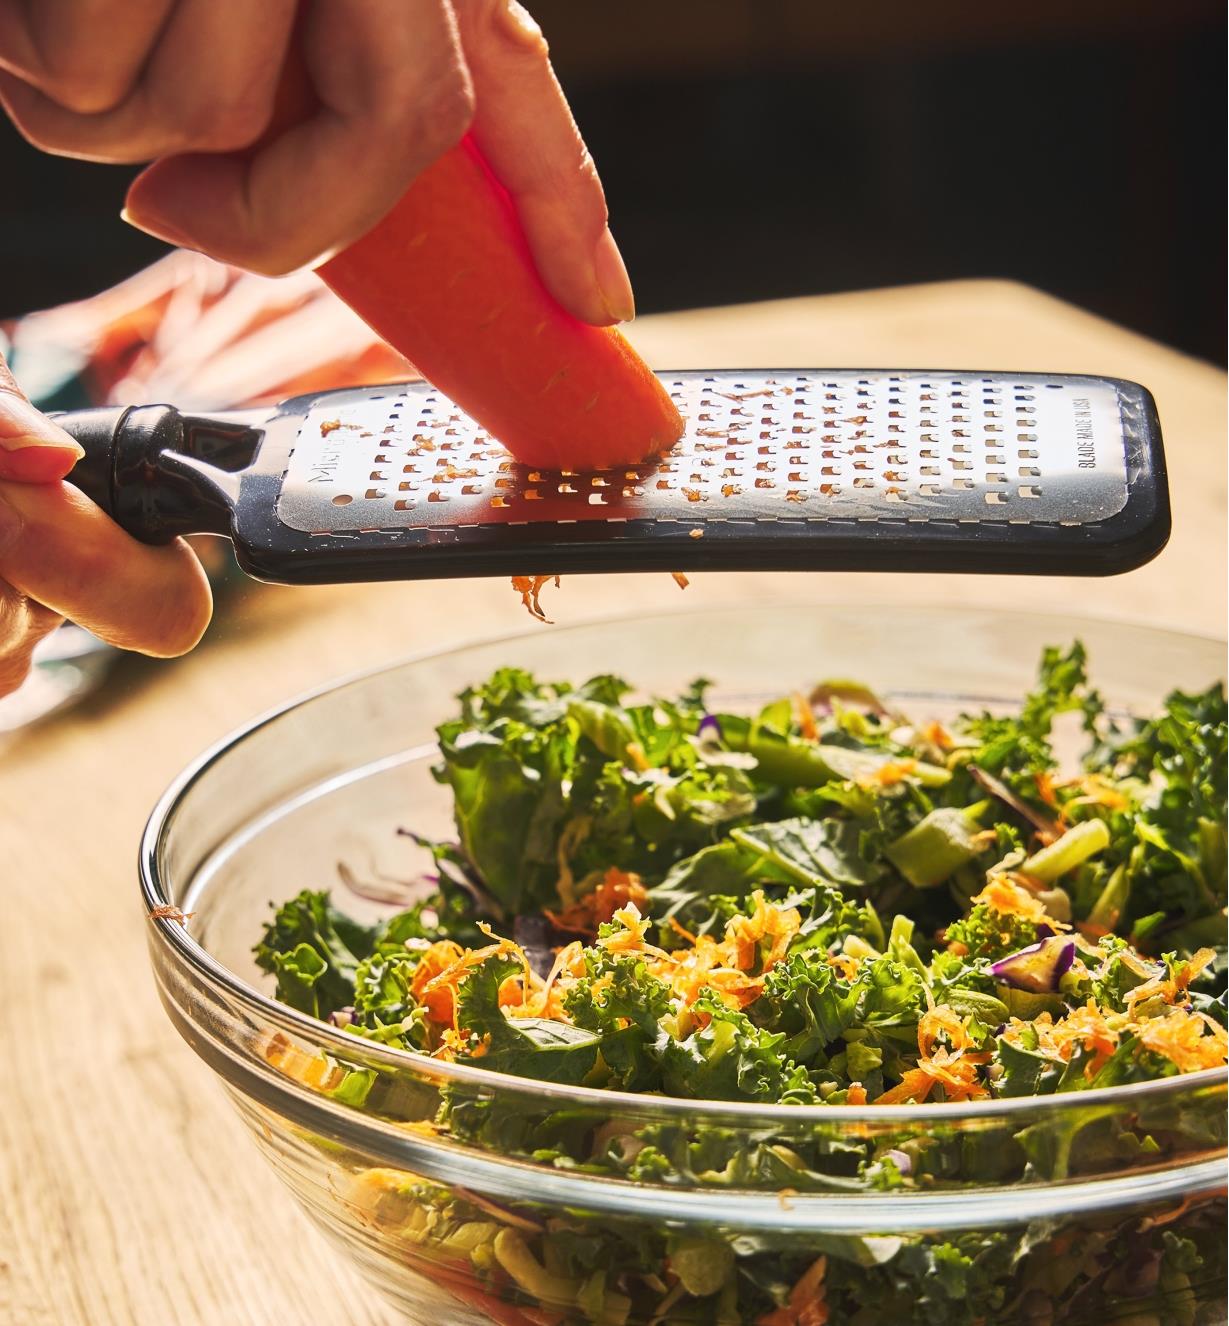 Using the coarse paddle grater to grate a carrot over a salad